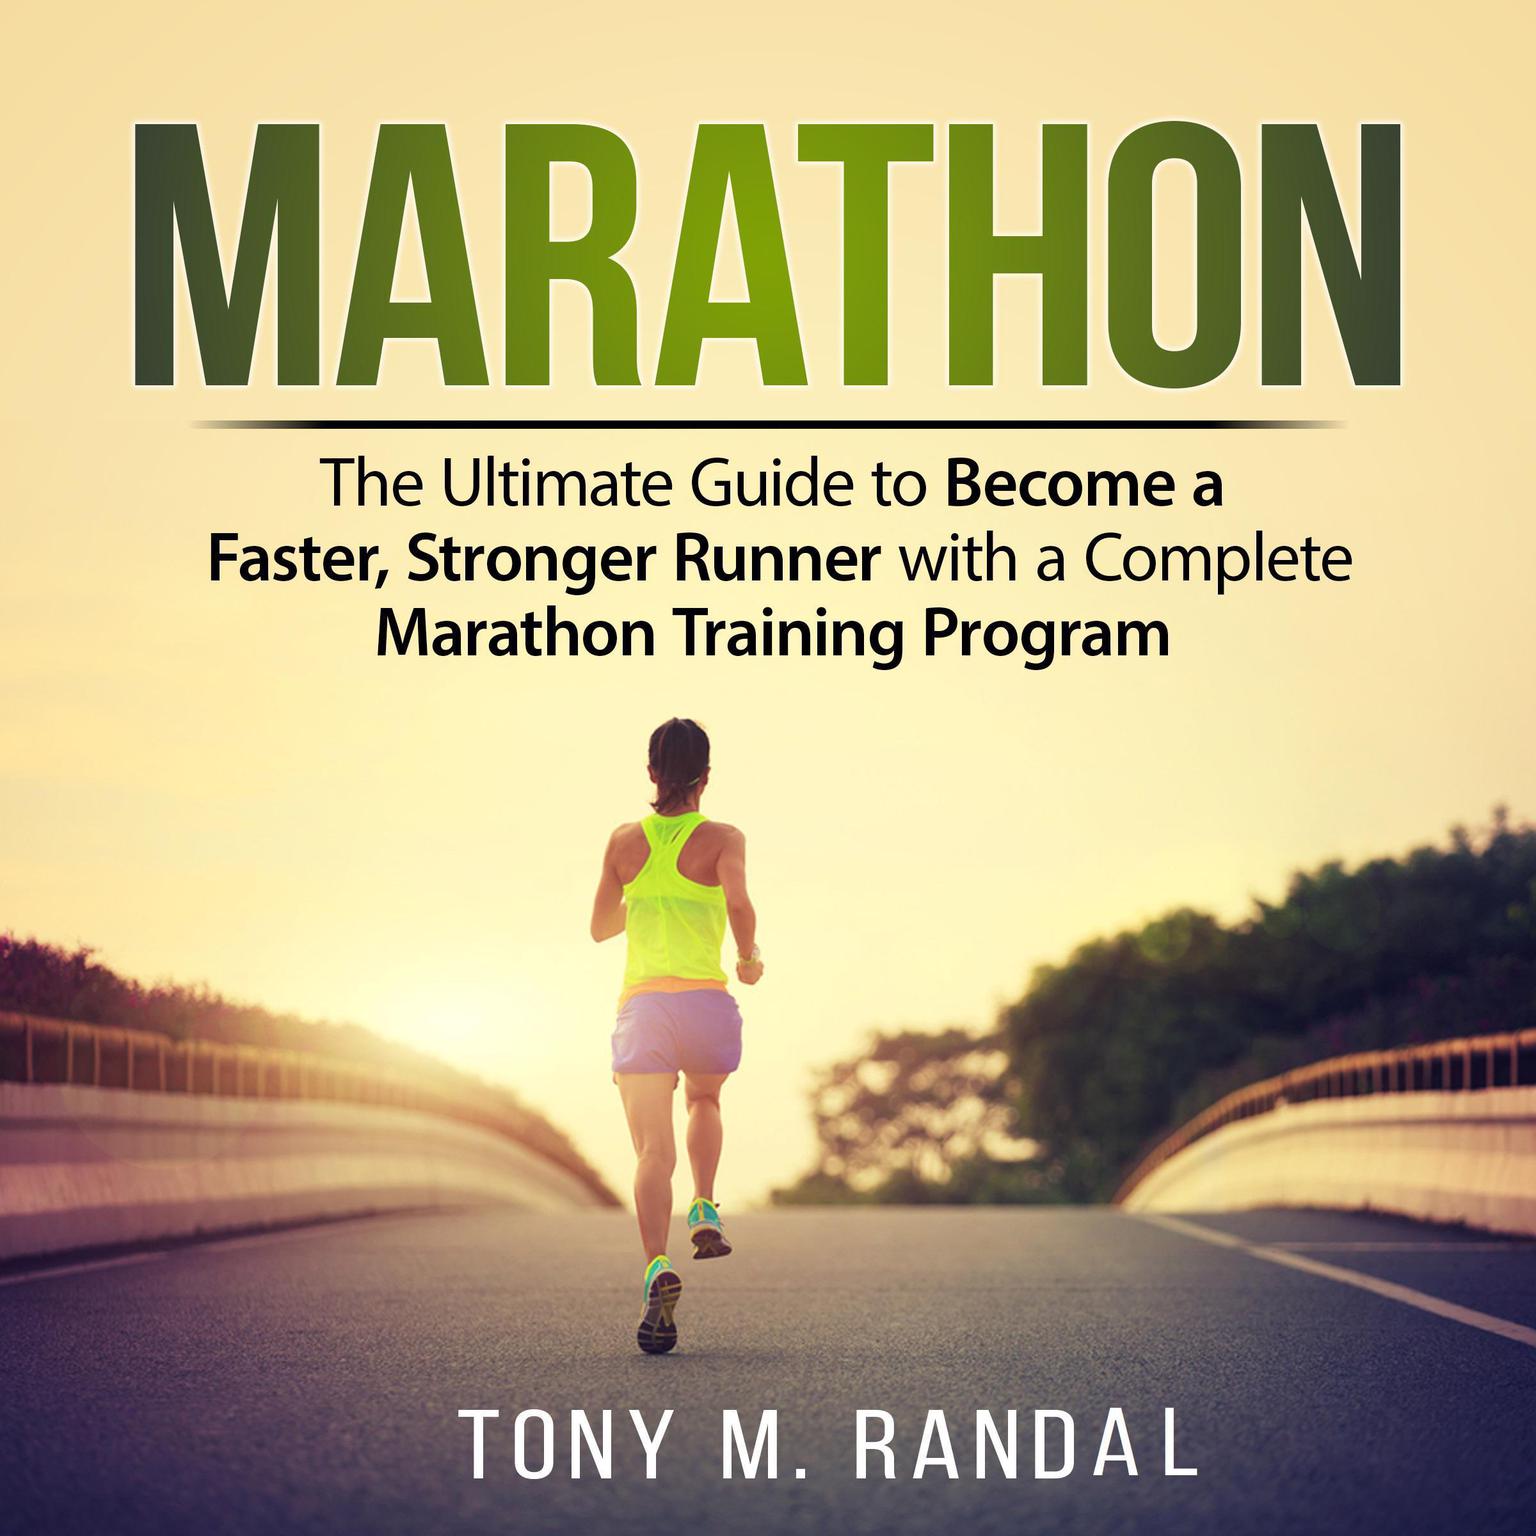 Marathon: The Ultimate Guide to Become a Faster, Stronger Runner with a Complete Marathon Training Program: The Ultimate Guide to Become a Faster, Stronger Runner with a Complete Marathon Training Program Audiobook, by Tony M. Randal